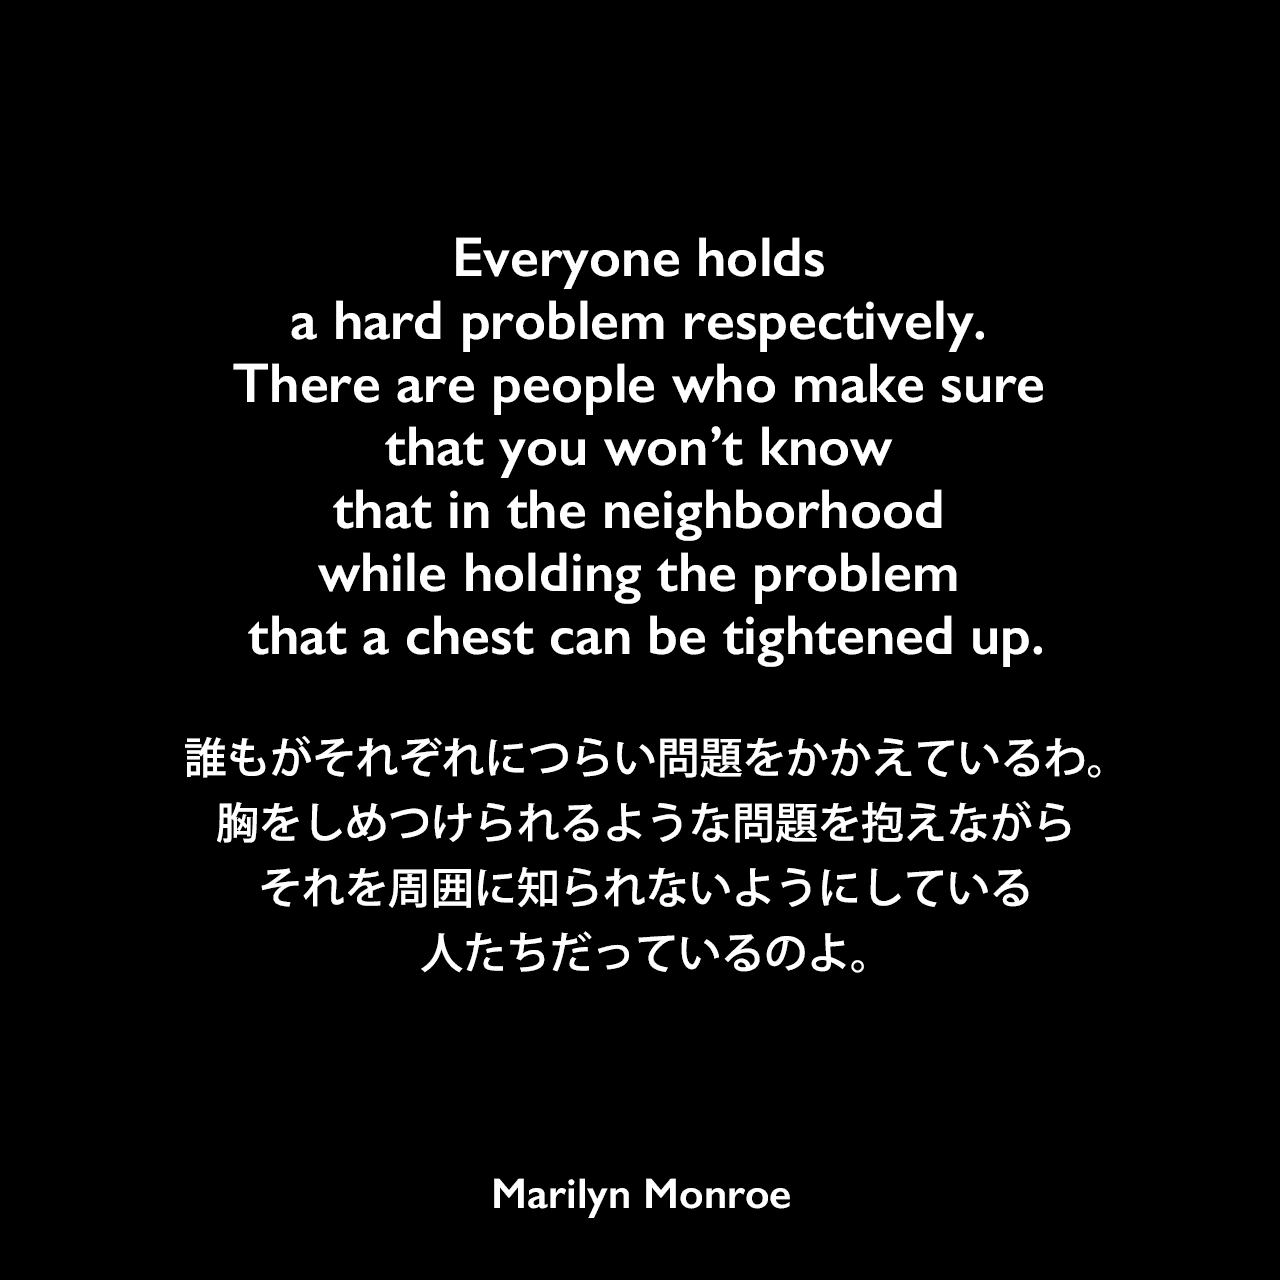 Everyone holds a hard problem respectively. There are people who make sure that you won’t know that in the neighborhood while holding the problem that a chest can be tightened up.誰もがそれぞれにつらい問題をかかえているわ。胸をしめつけられるような問題を抱えながら、それを周囲に知られないようにしている人たちだっているのよ。Marilyn Monroe